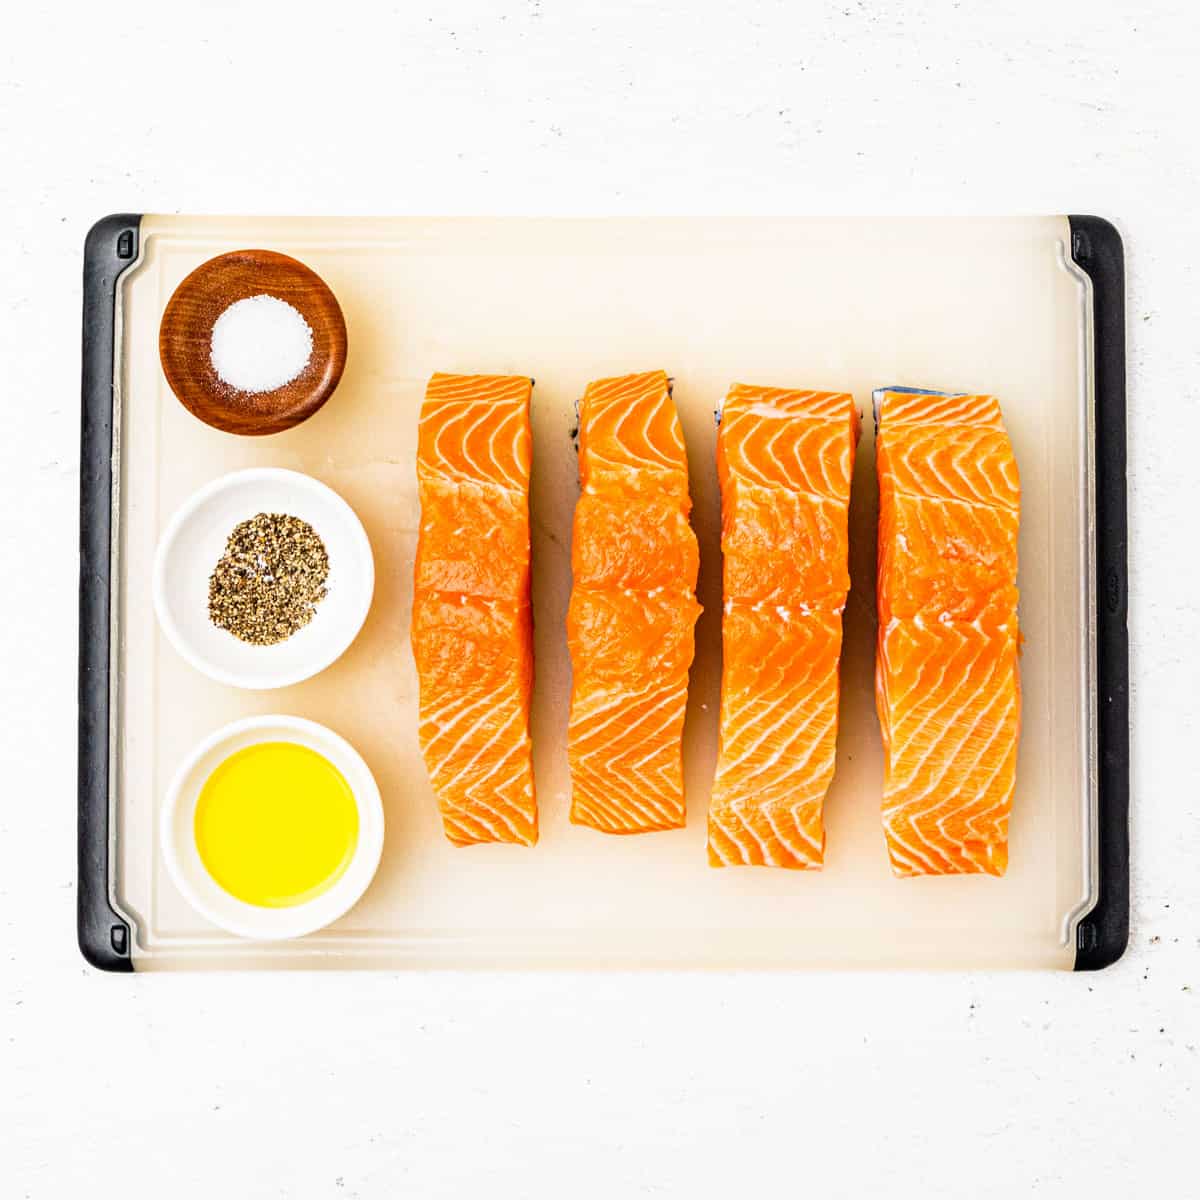 Salmon fillets on a cutting board next to small pinch bowls of olive oil, salt, and pepper.